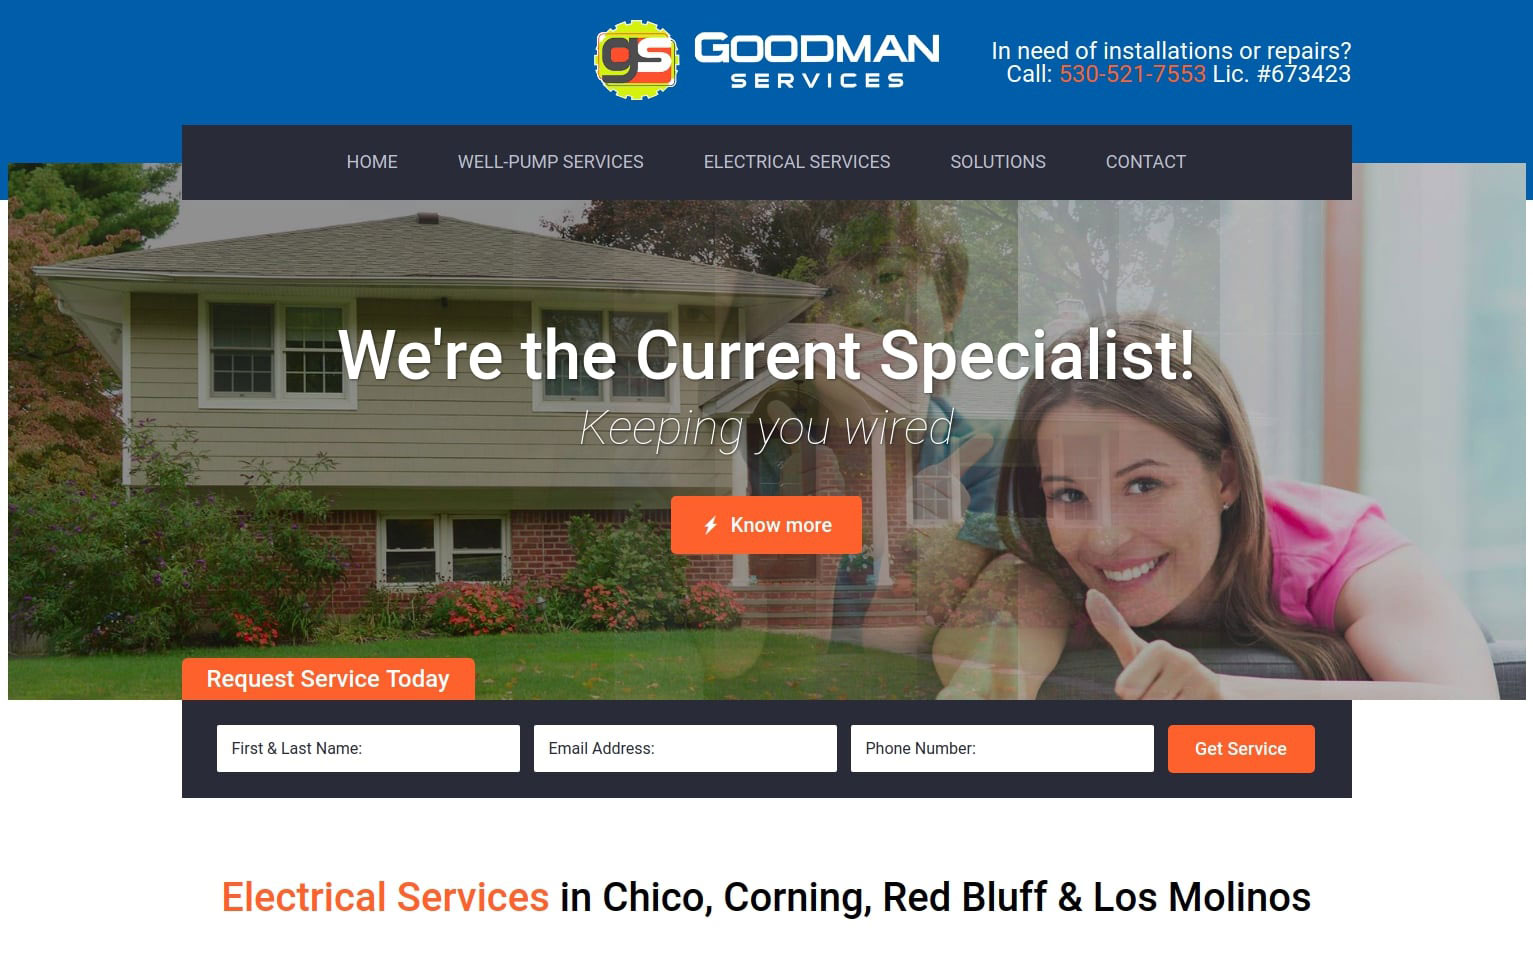 web-design-and-development-example-project-goodman-services-cropped